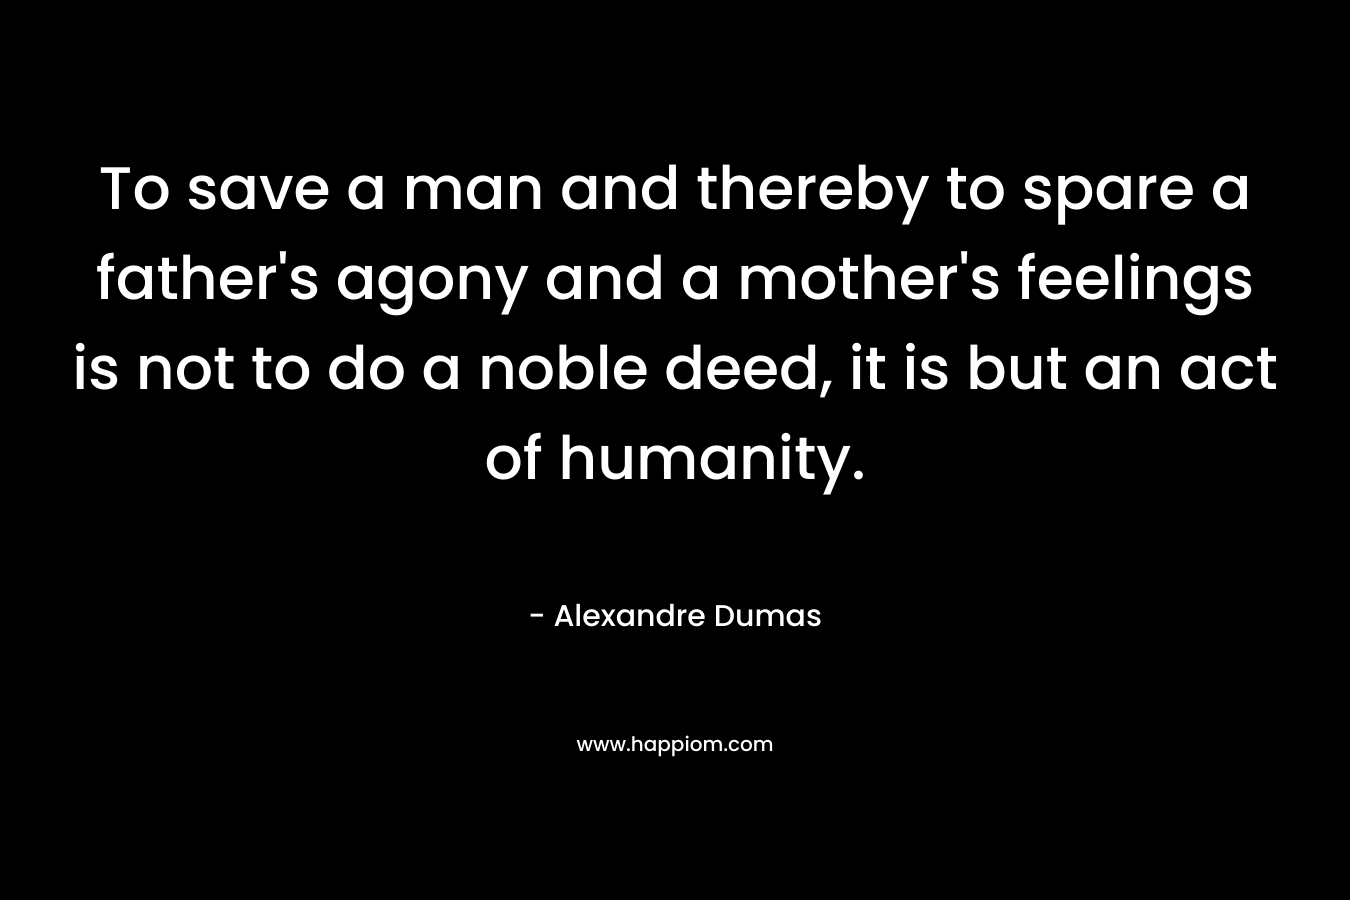 To save a man and thereby to spare a father's agony and a mother's feelings is not to do a noble deed, it is but an act of humanity.